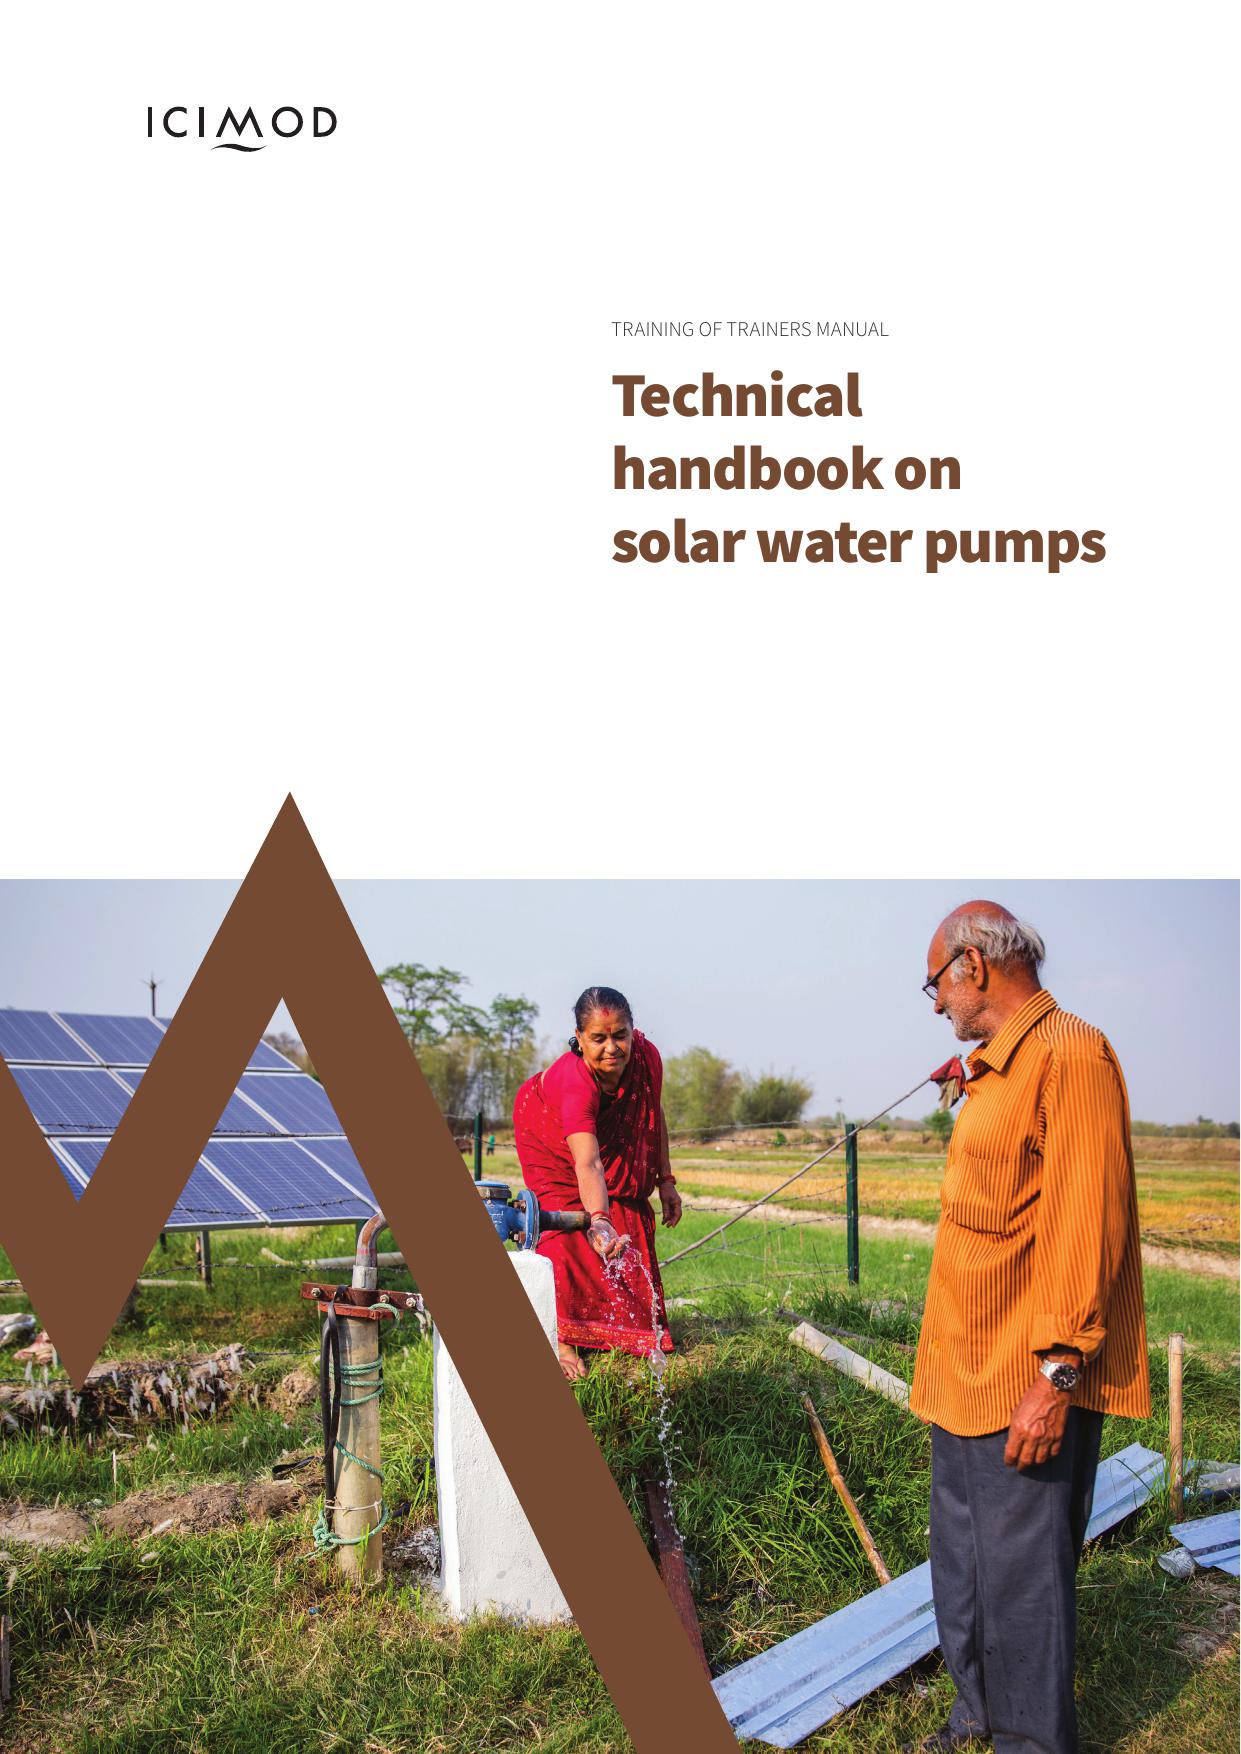 Training of trainers manual on technical handbook on solar water pumps